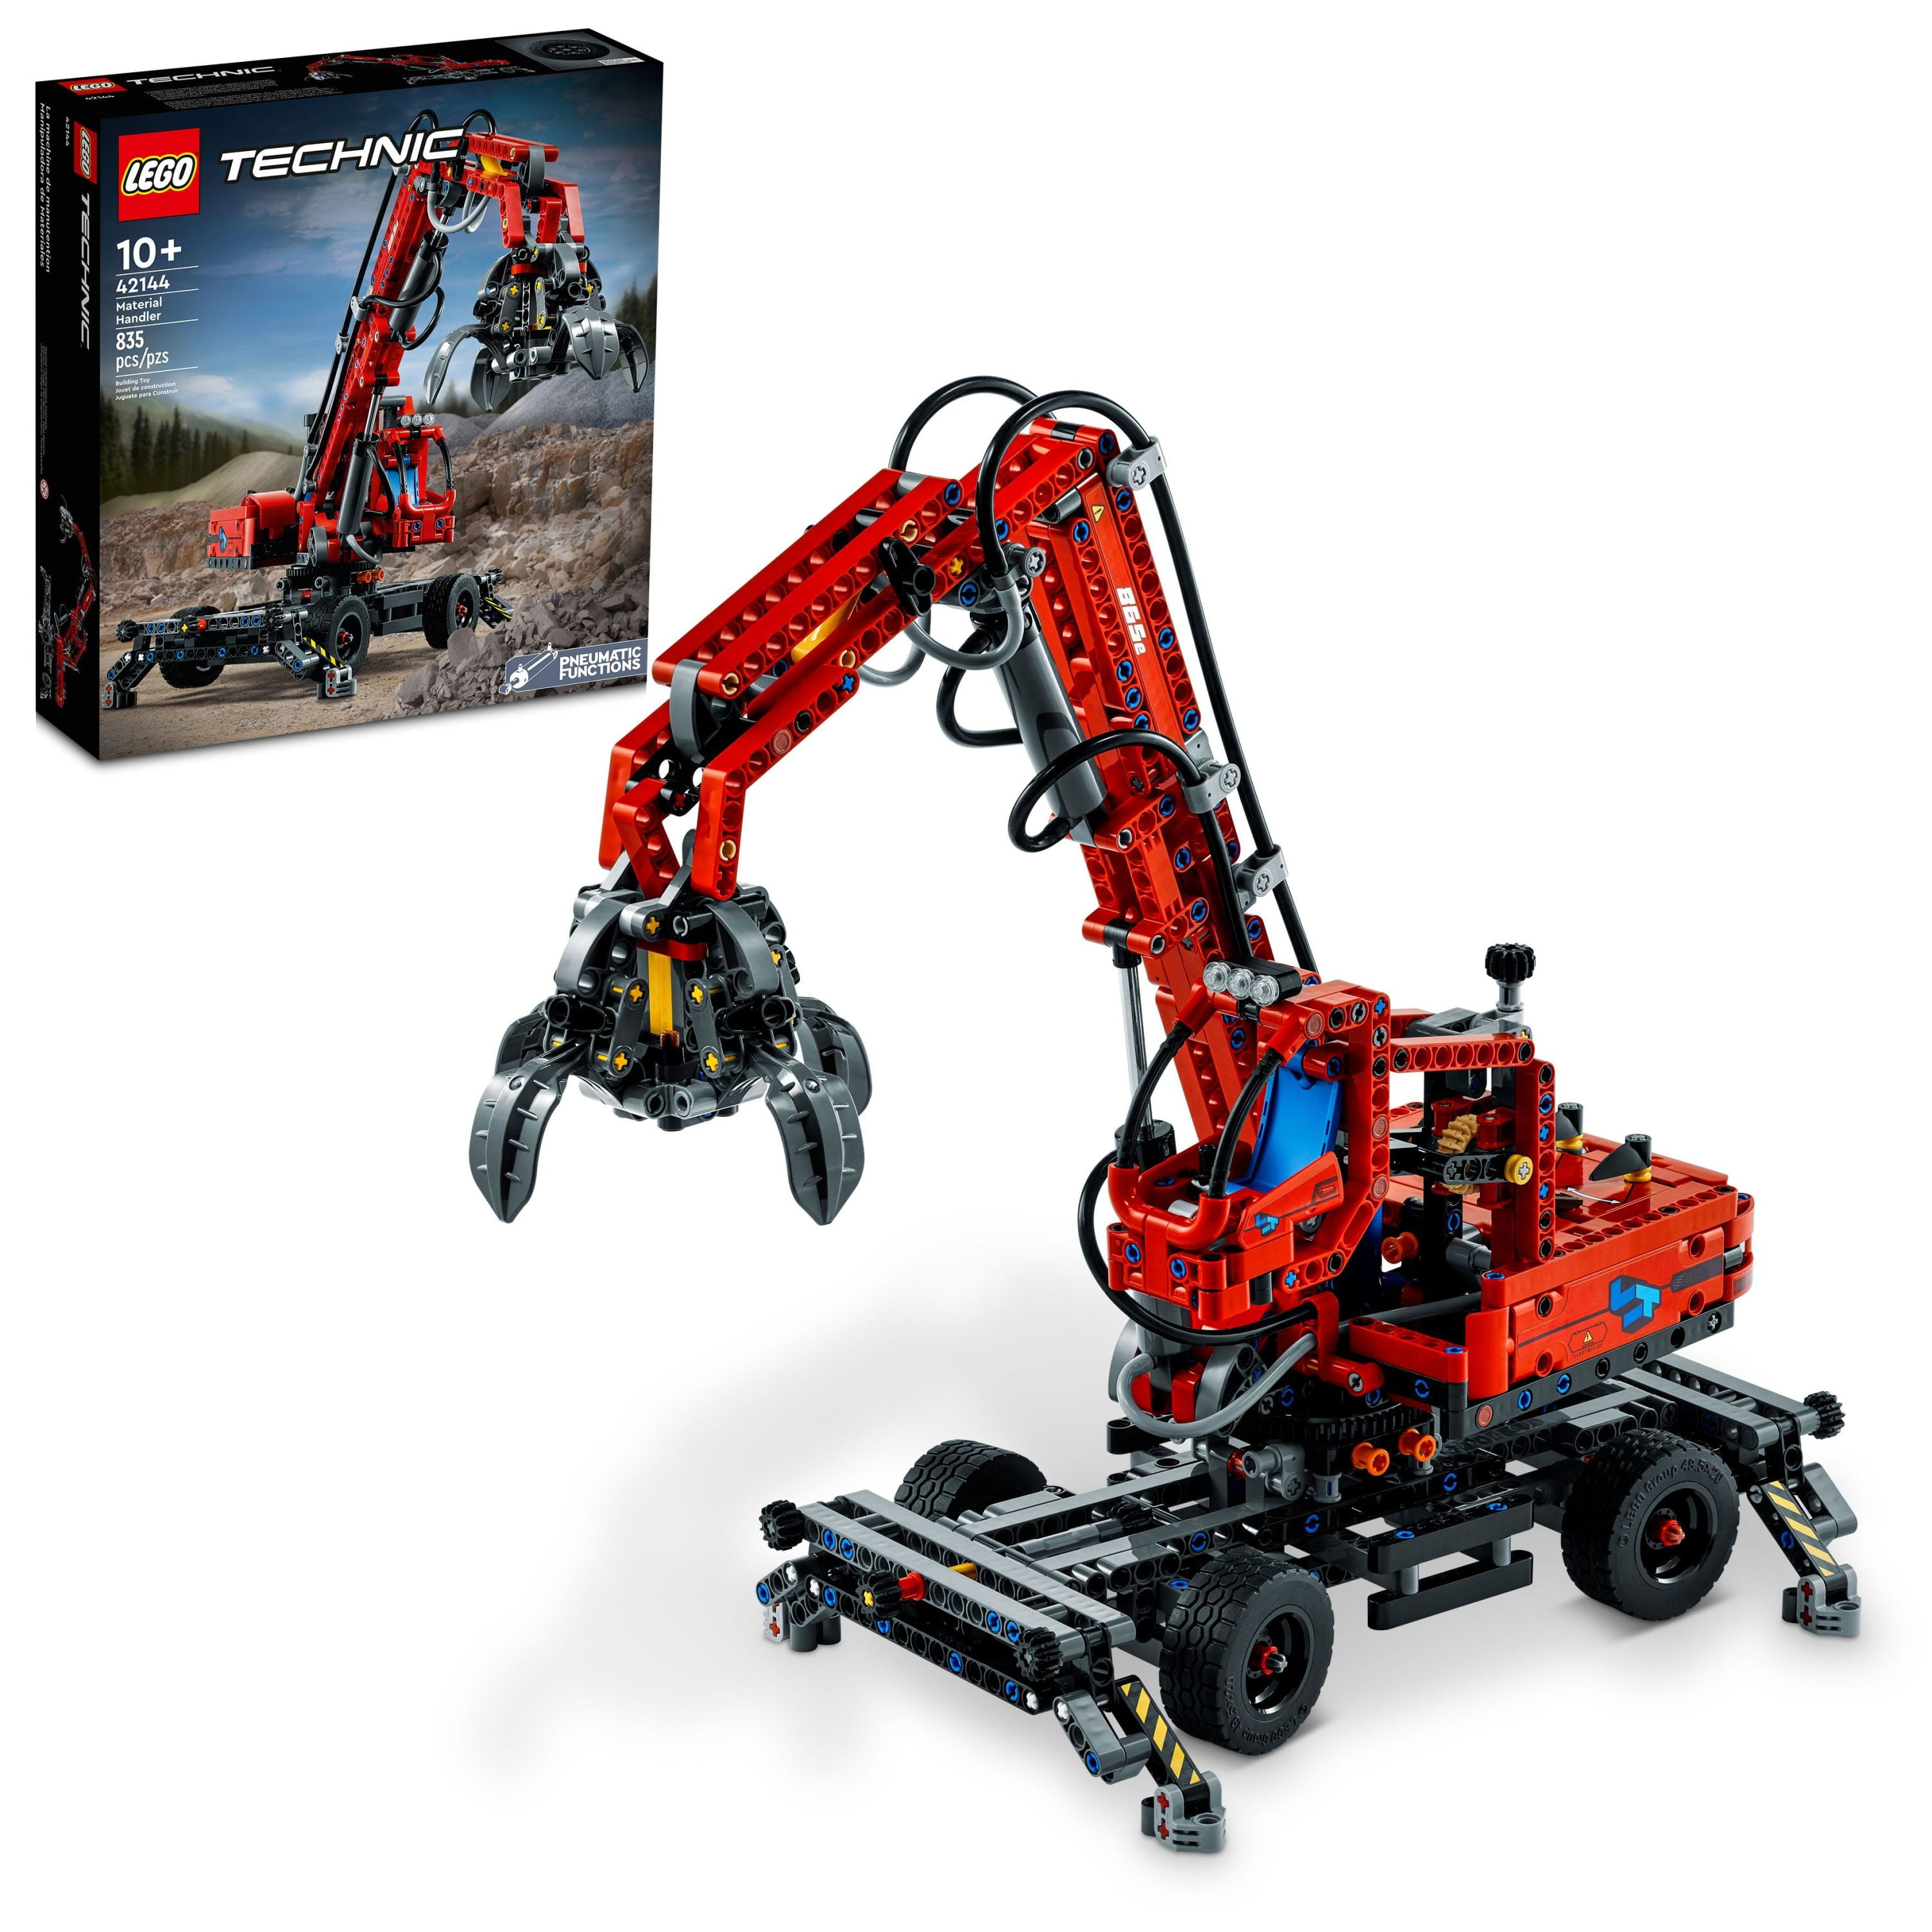 LEGO Technic Material Handler 42144, Model Crane Toy, with Manual and Pneumatic Functions, Construction Building Set, Educational Toys - Walmart.com